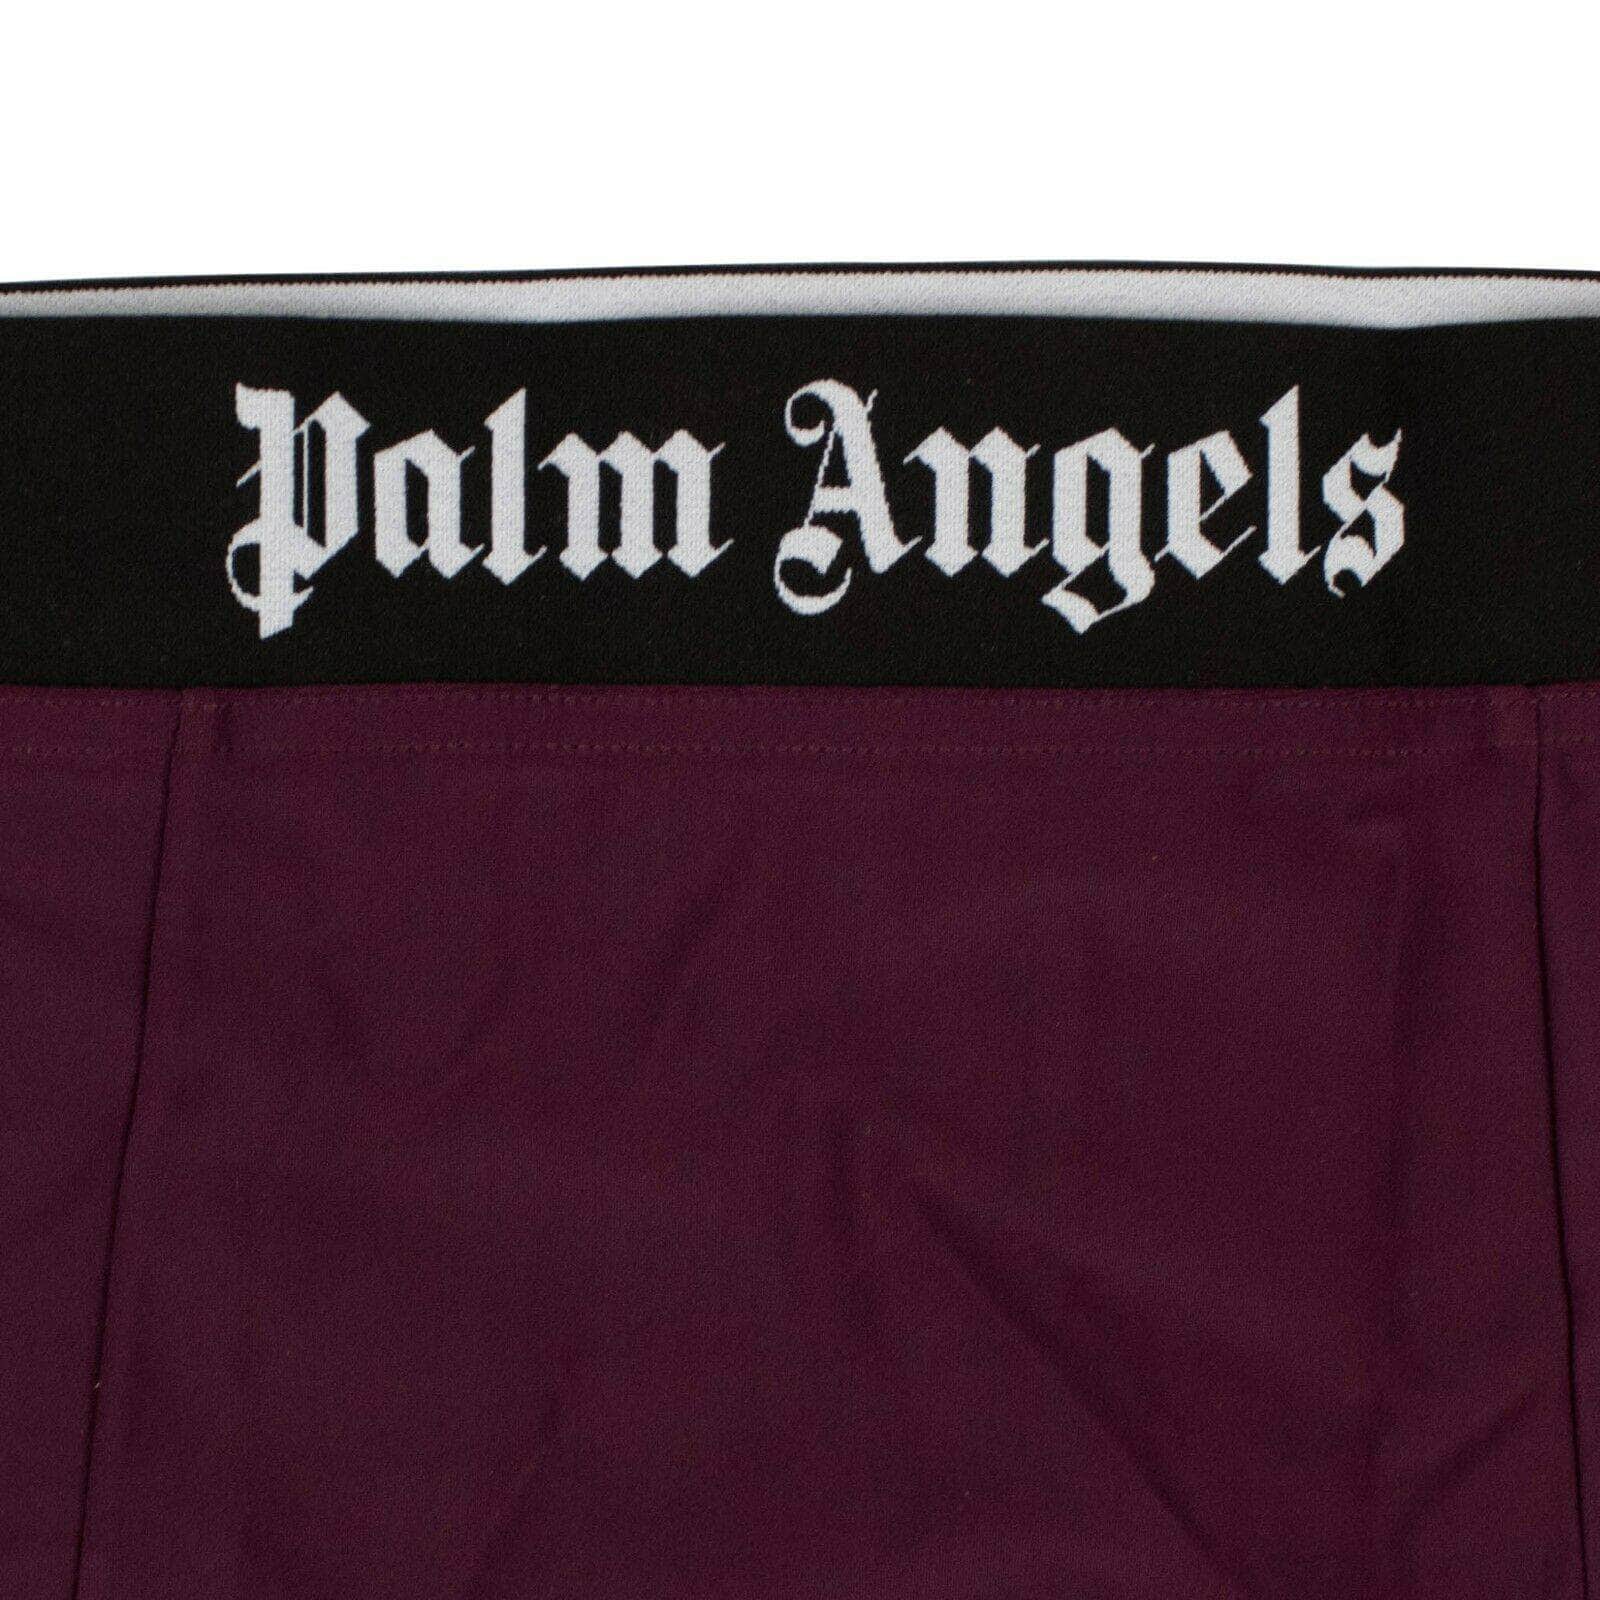 PALM ANGELS couponcollection, gender-womens, main-accessories, palm-angels, size-l, size-m, size-s, size-xs, under-250 Purple Logo Waistband Breifs